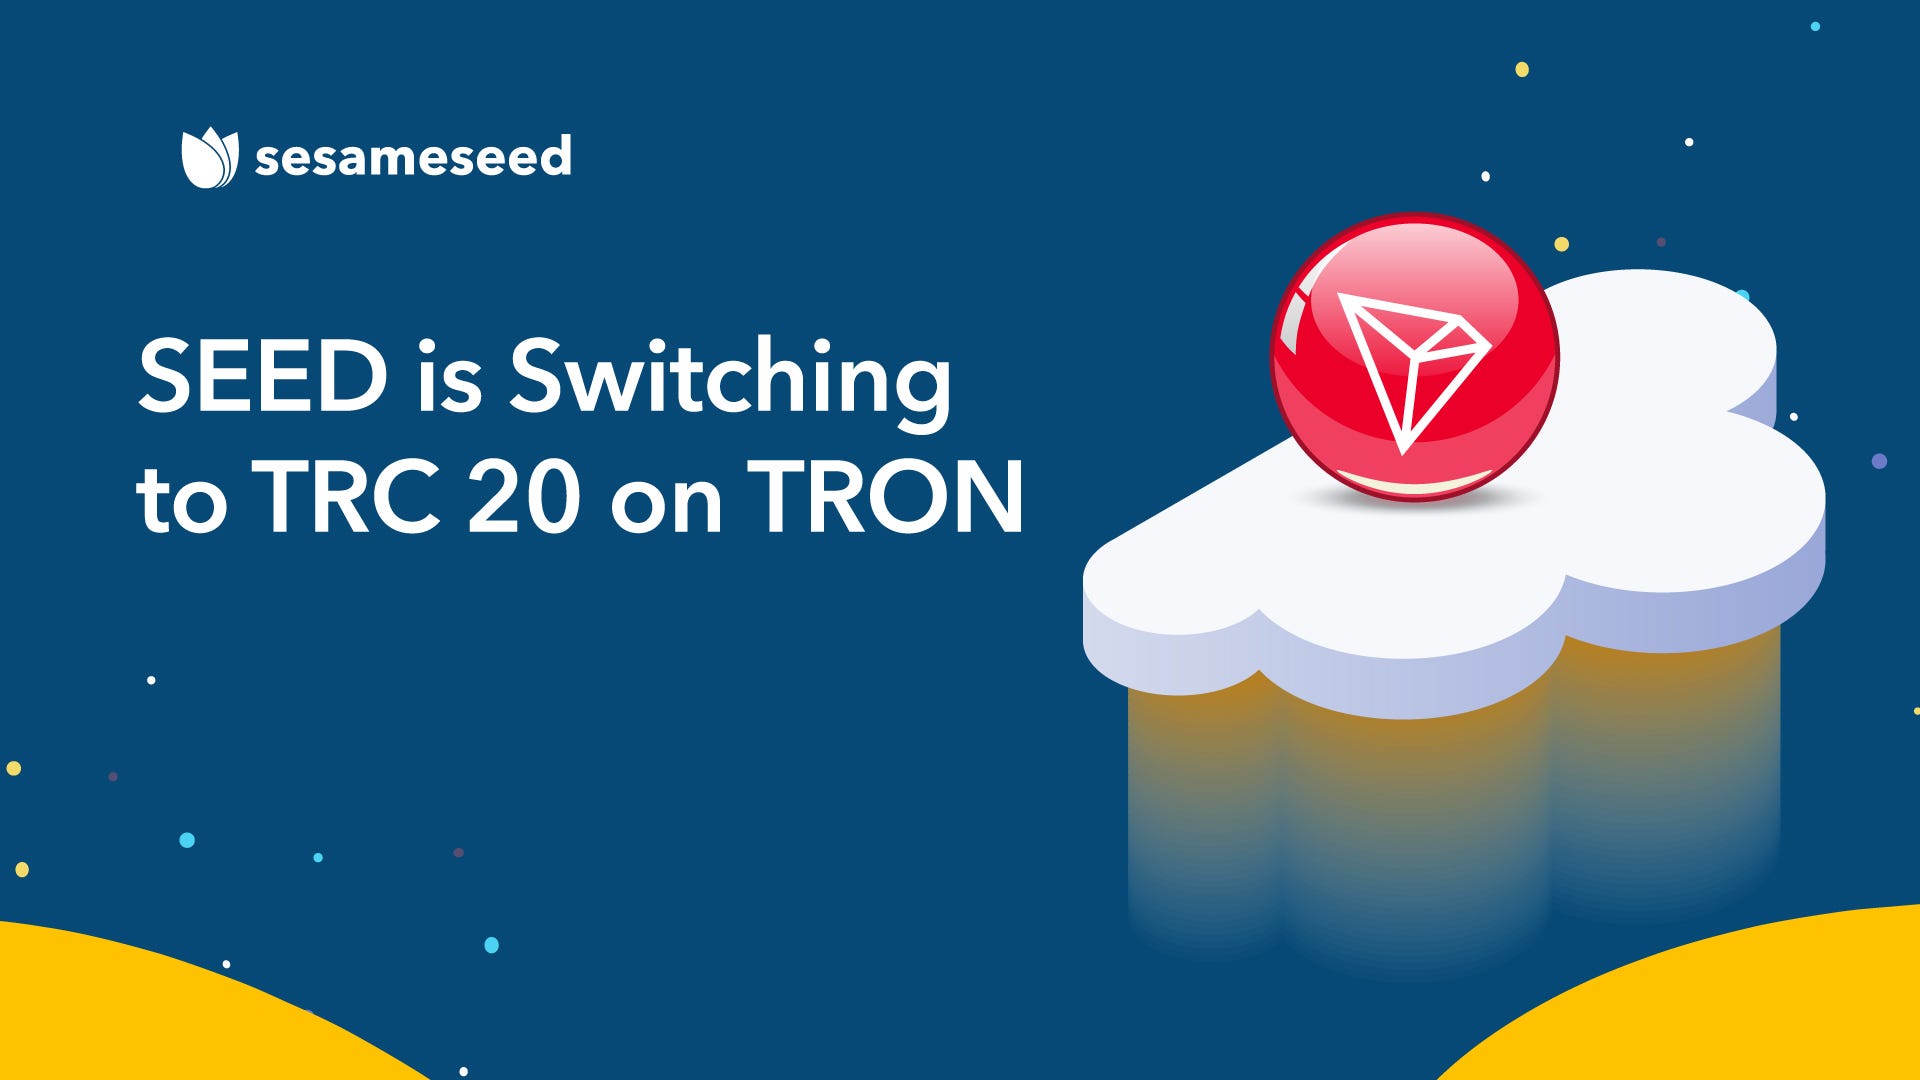 TRC10 SEED is Switching to TRC20 on TRON | by Sesameseed ...